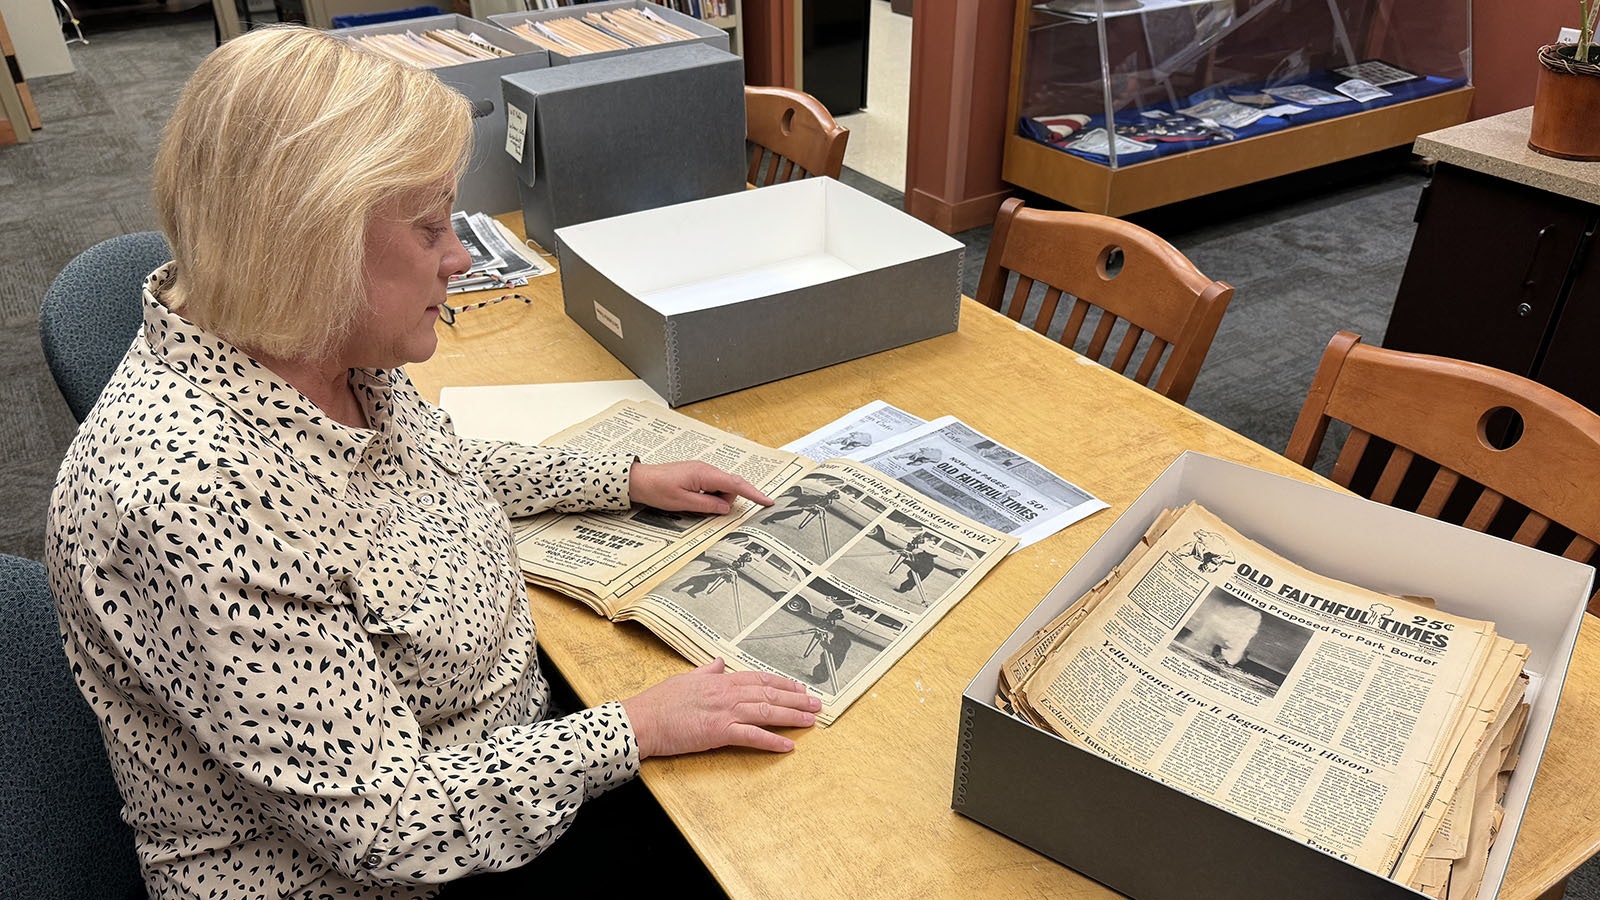 Park County Archivist Robyn Cutter studies an issue of the Old Faithful Times. She found the largest known collection of issues in the attic of her father-in-law Joe Cutter, the man who created and published the weekly newspaper in the 1970s.